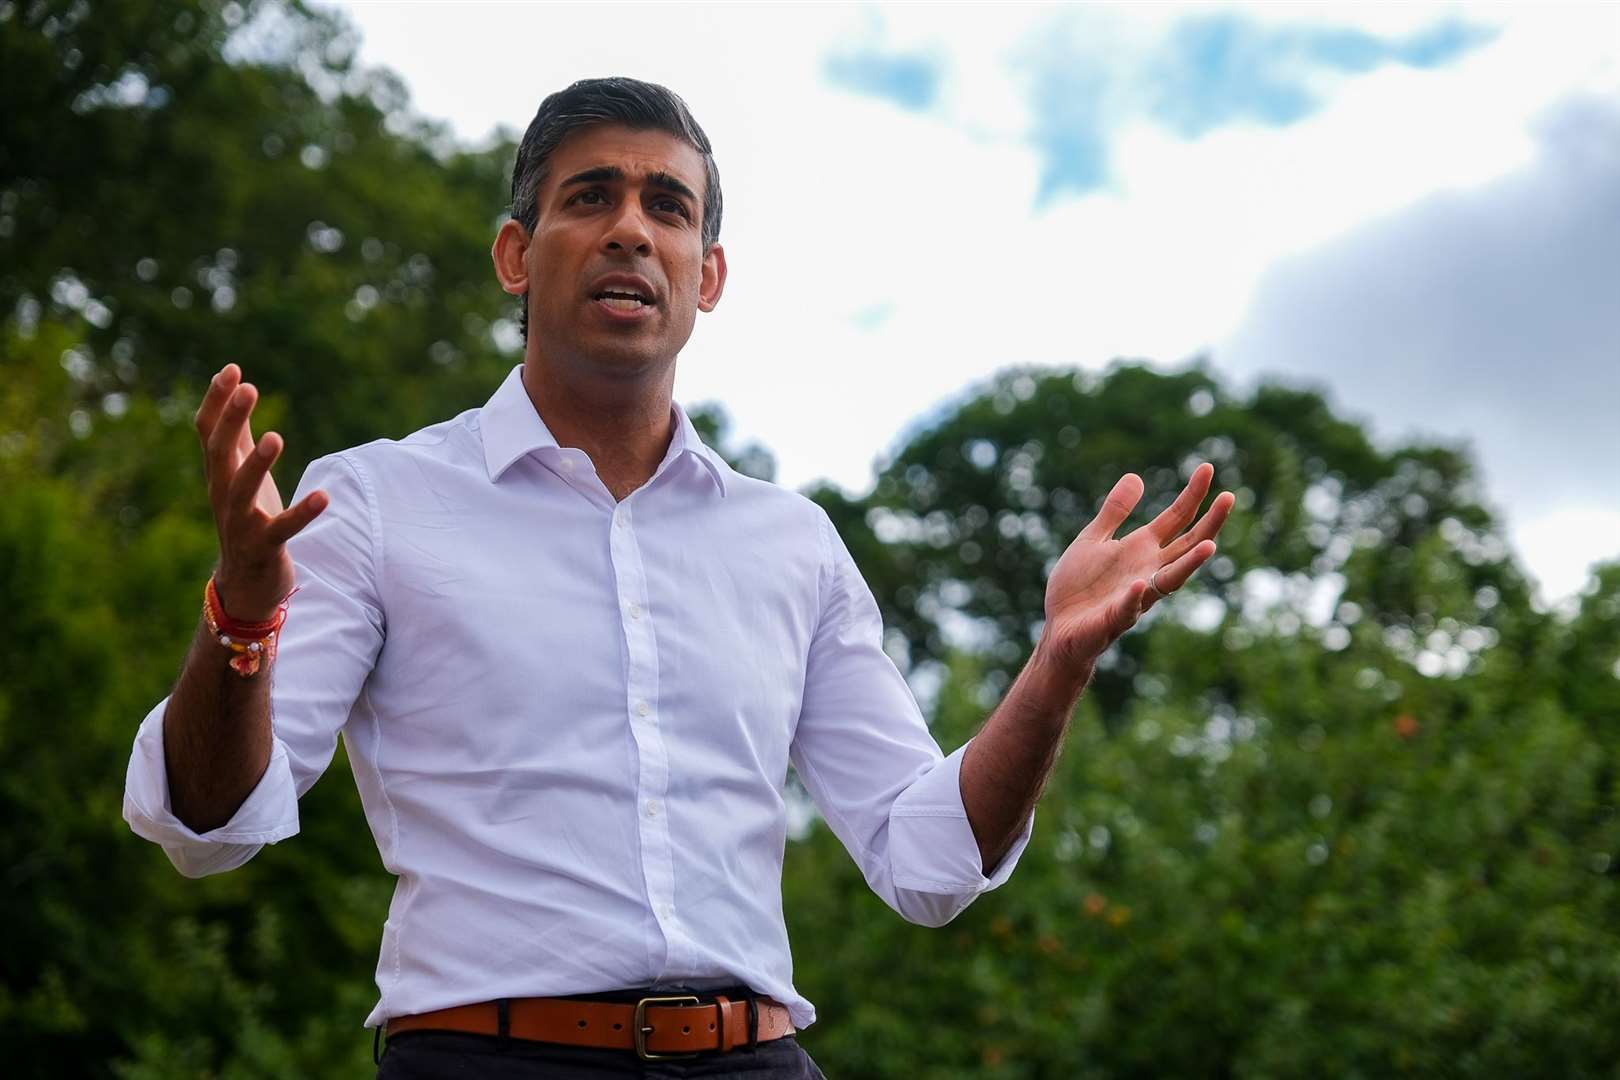 Rishi Sunak introduced the 5p cut to fuel duty during his time as chancellor